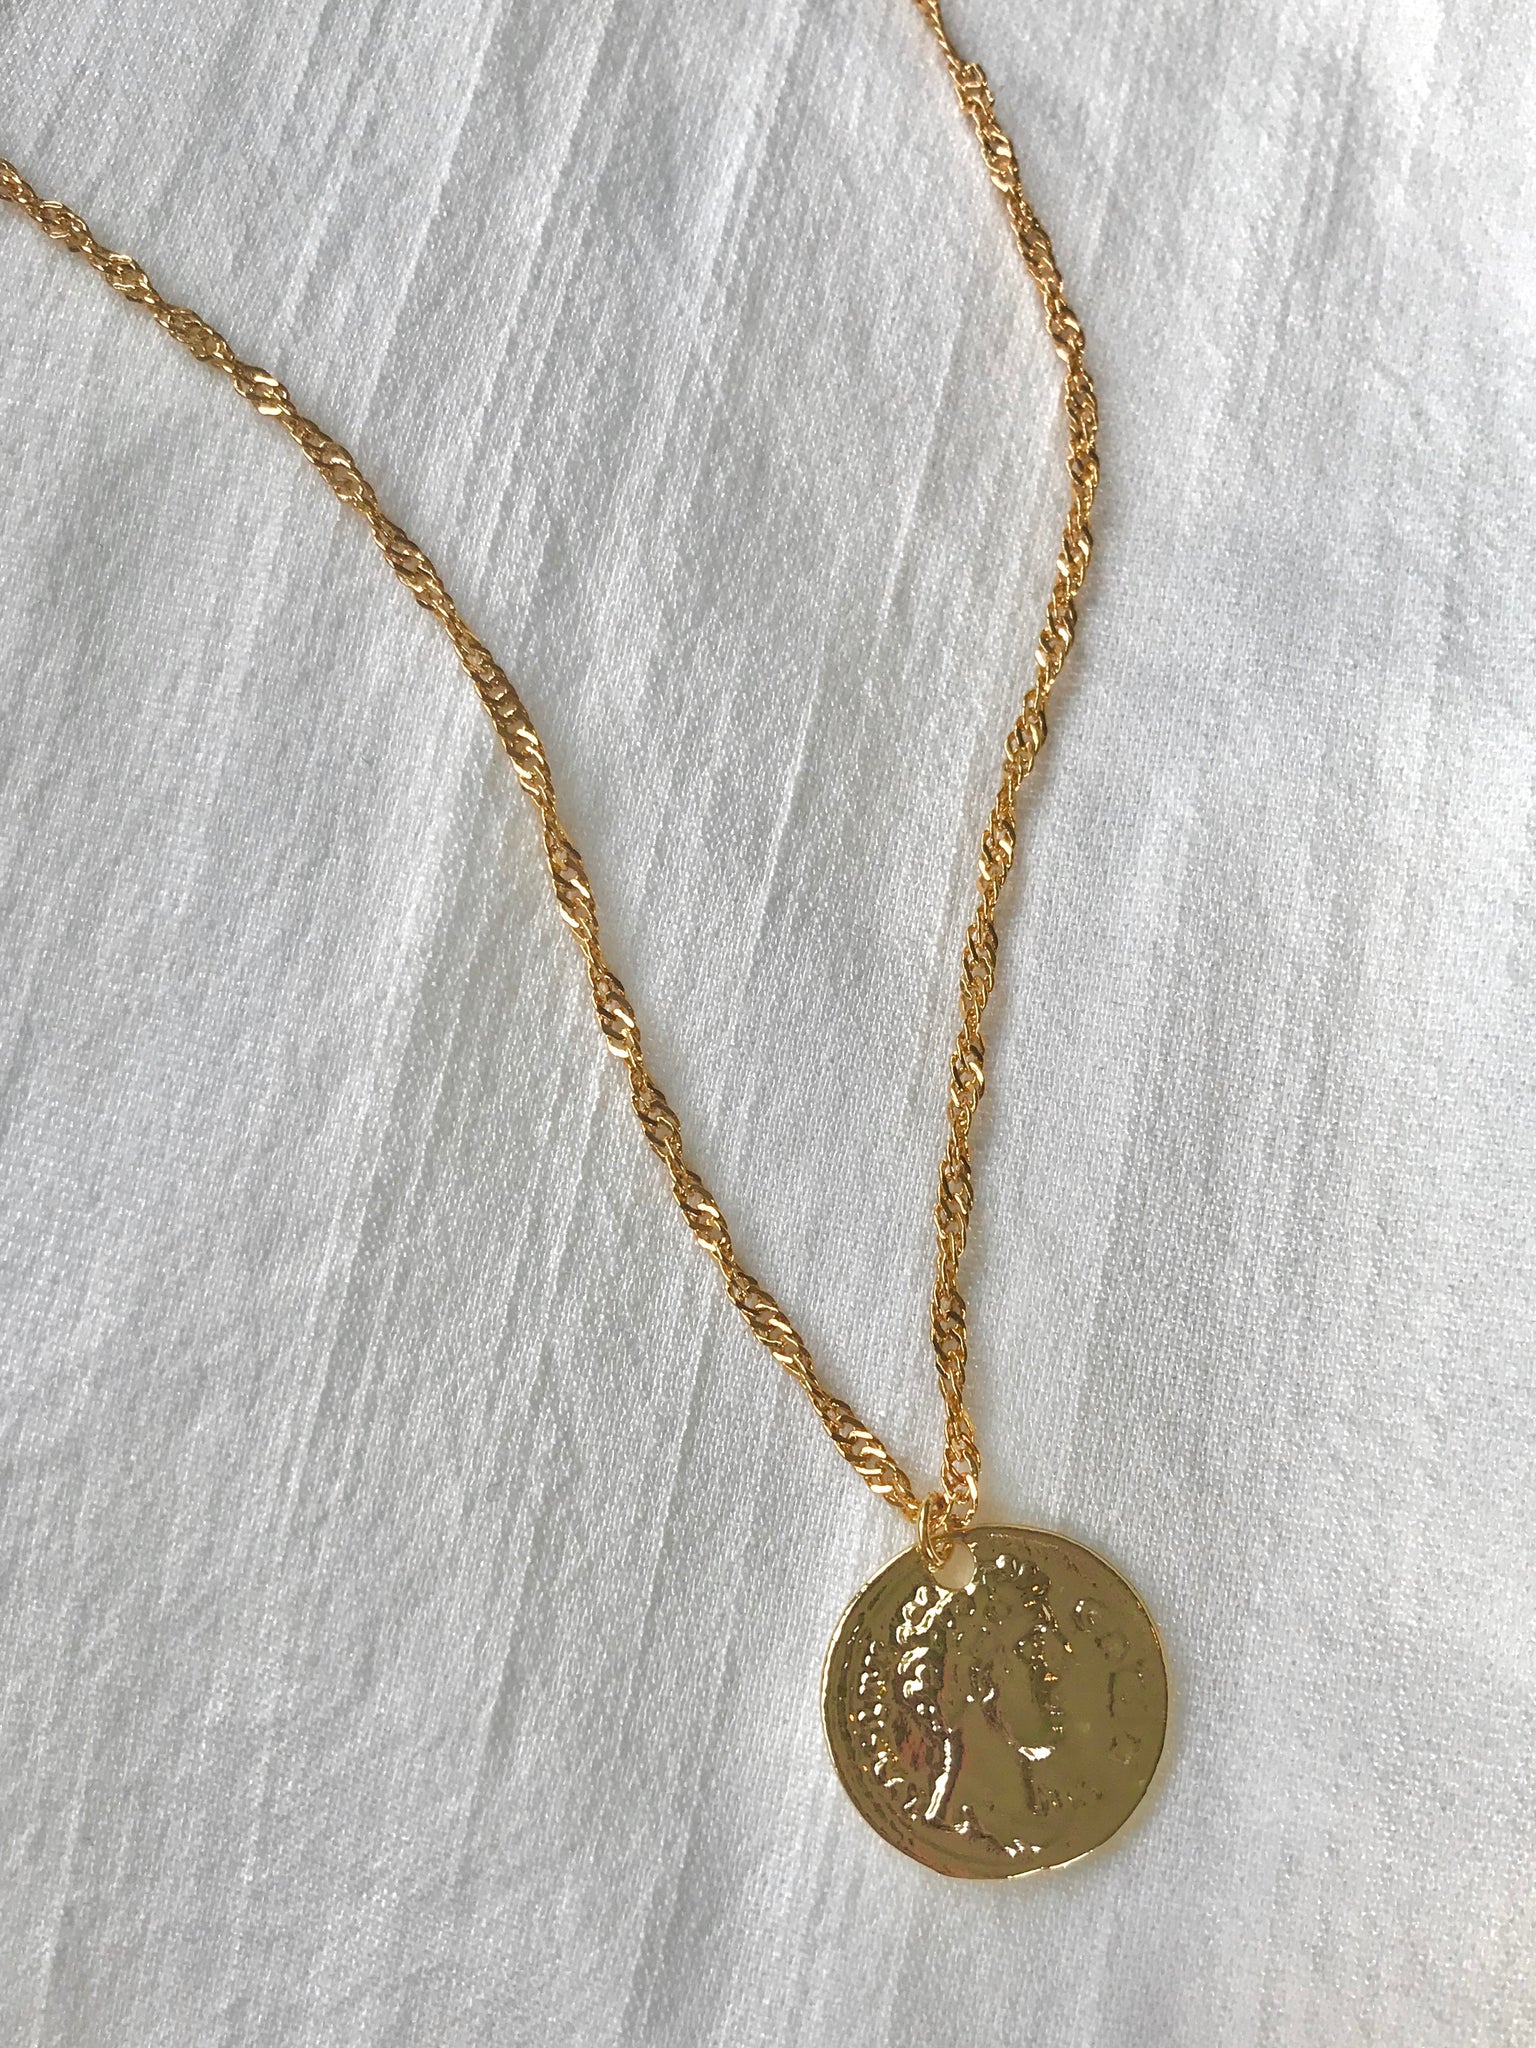 Athena Greek Coin Necklace